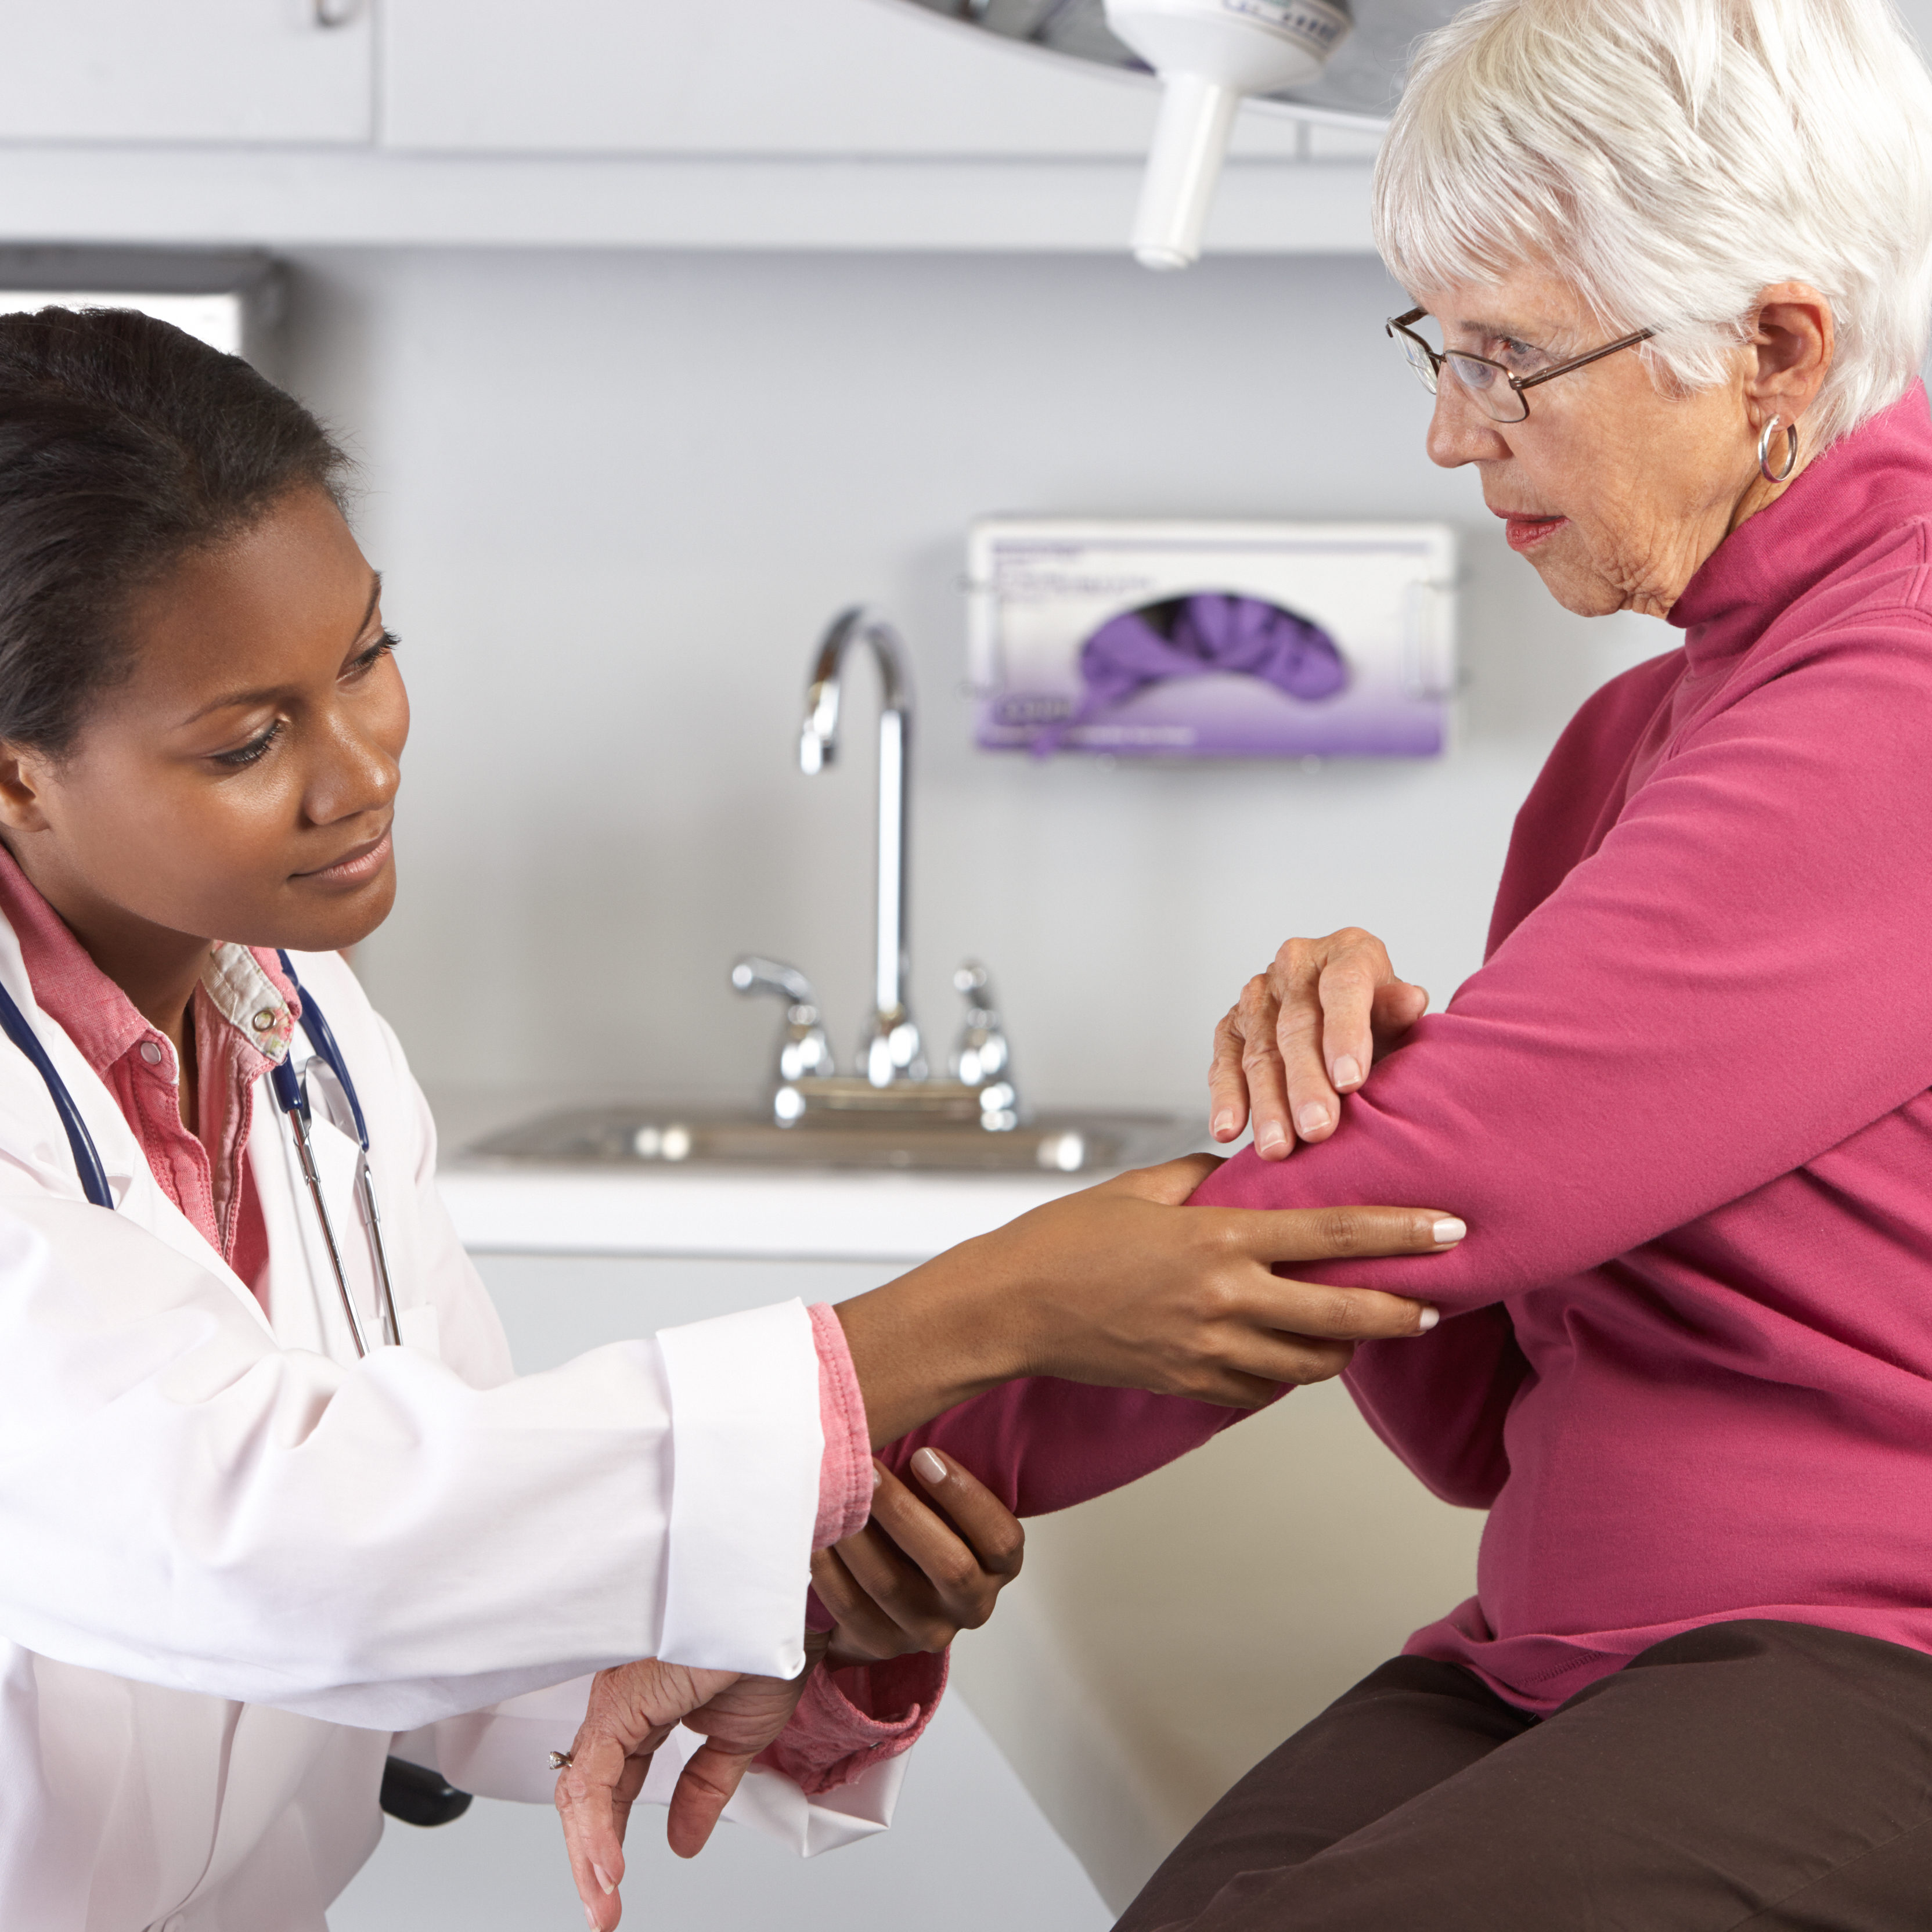 Female Doctor Examining Female Patient With Elbow Pain